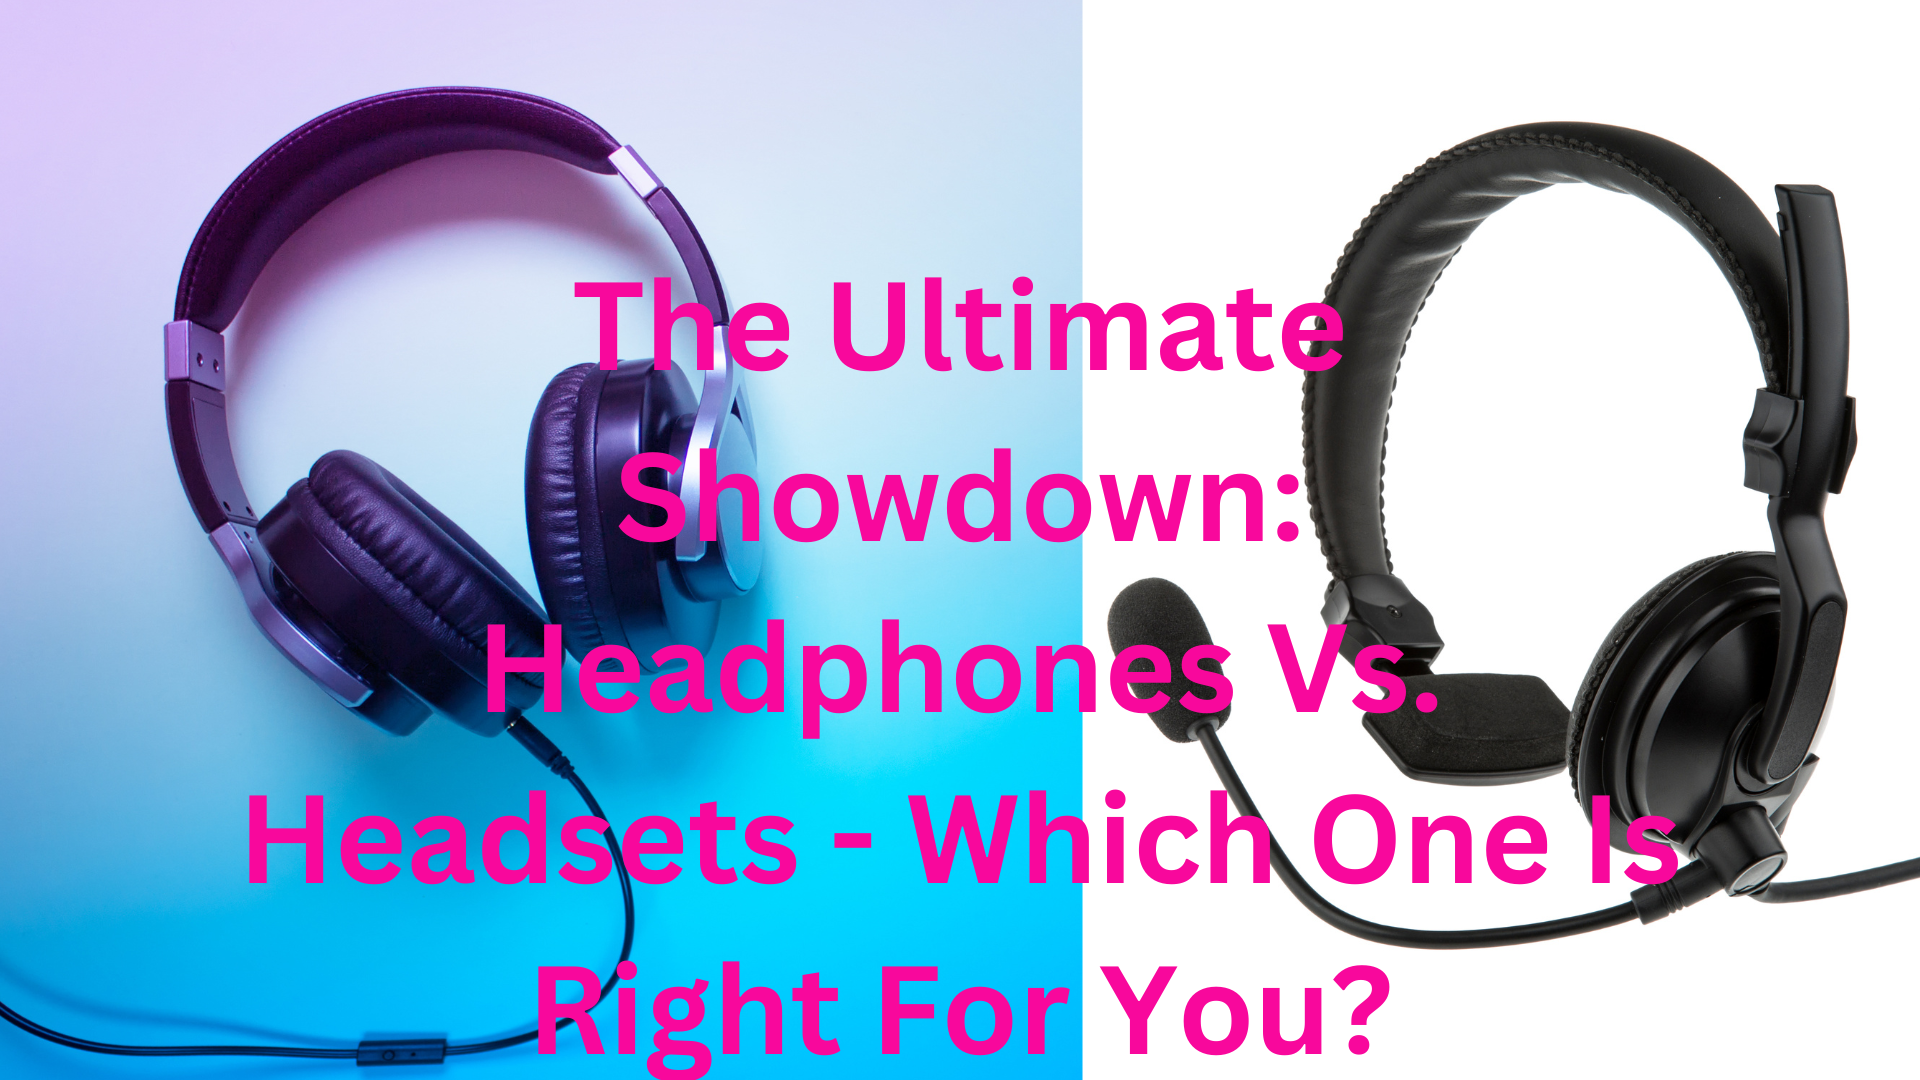 The Ultimate Showdown Headphones Vs. Headsets Which One Is Right For You